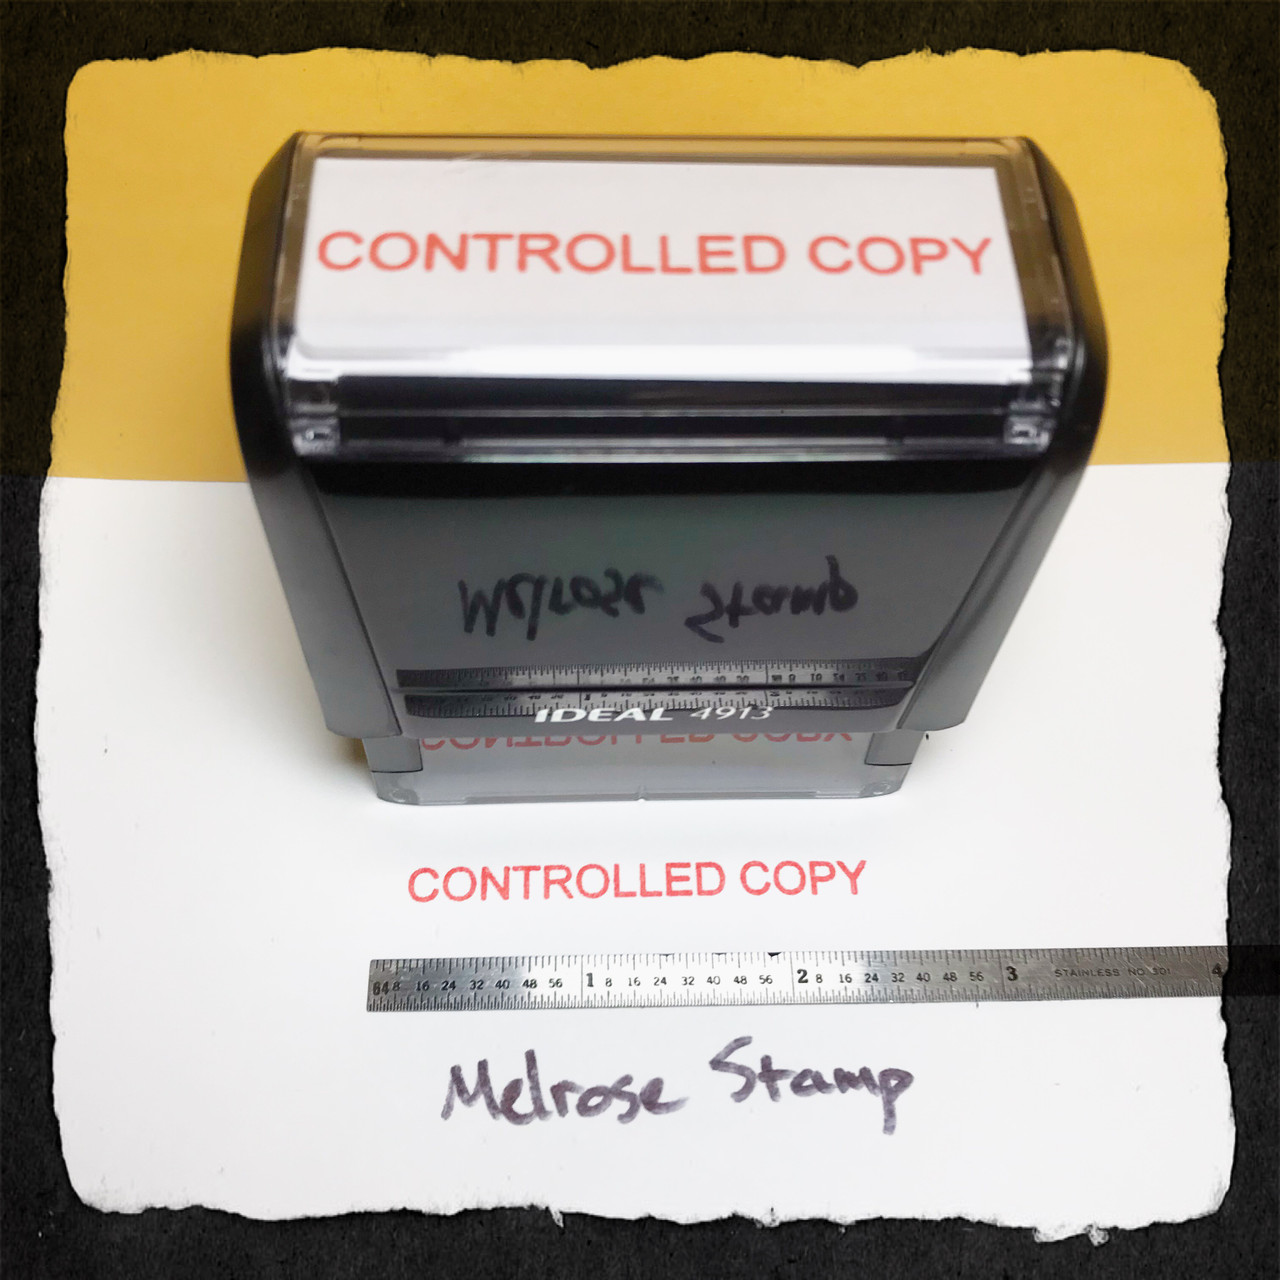 Controlled Copy Rubber Stamp For Office Use Self Inking Melrose Stamp